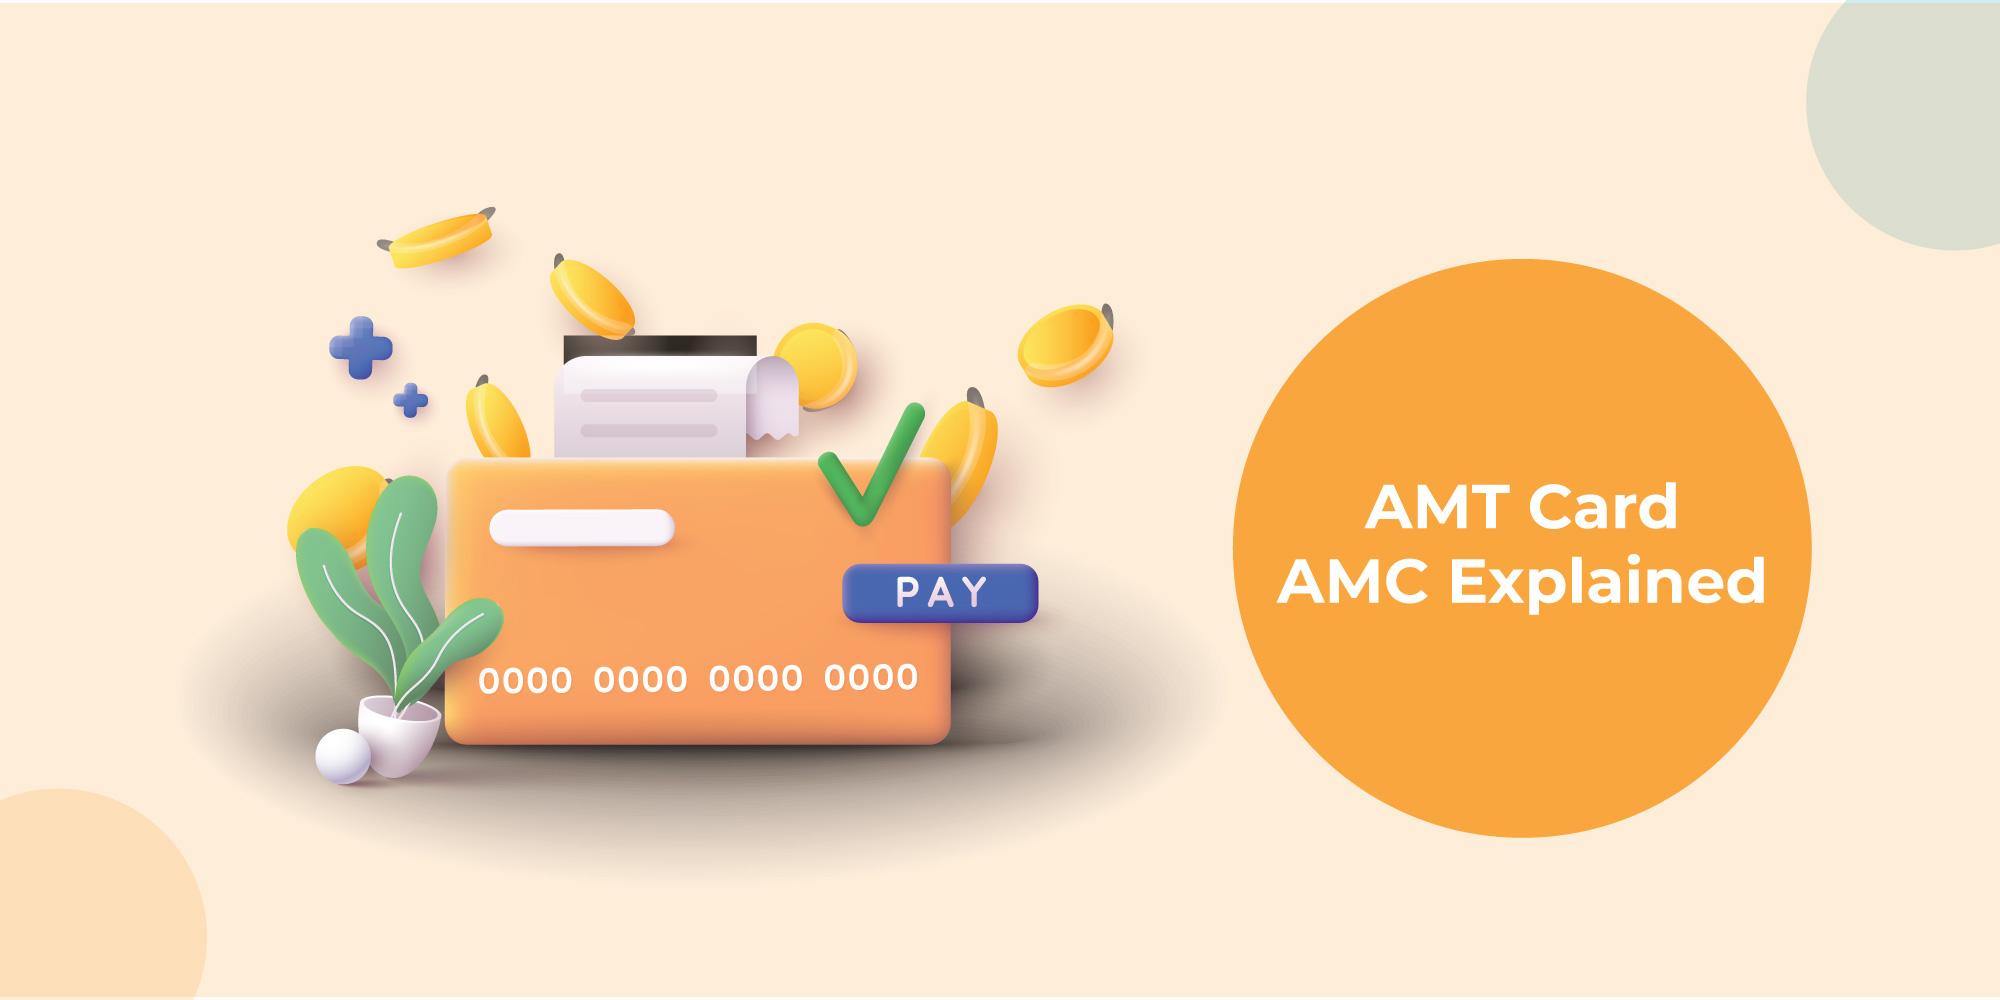 ATM Card AMC: What is it and how can you avoid it?